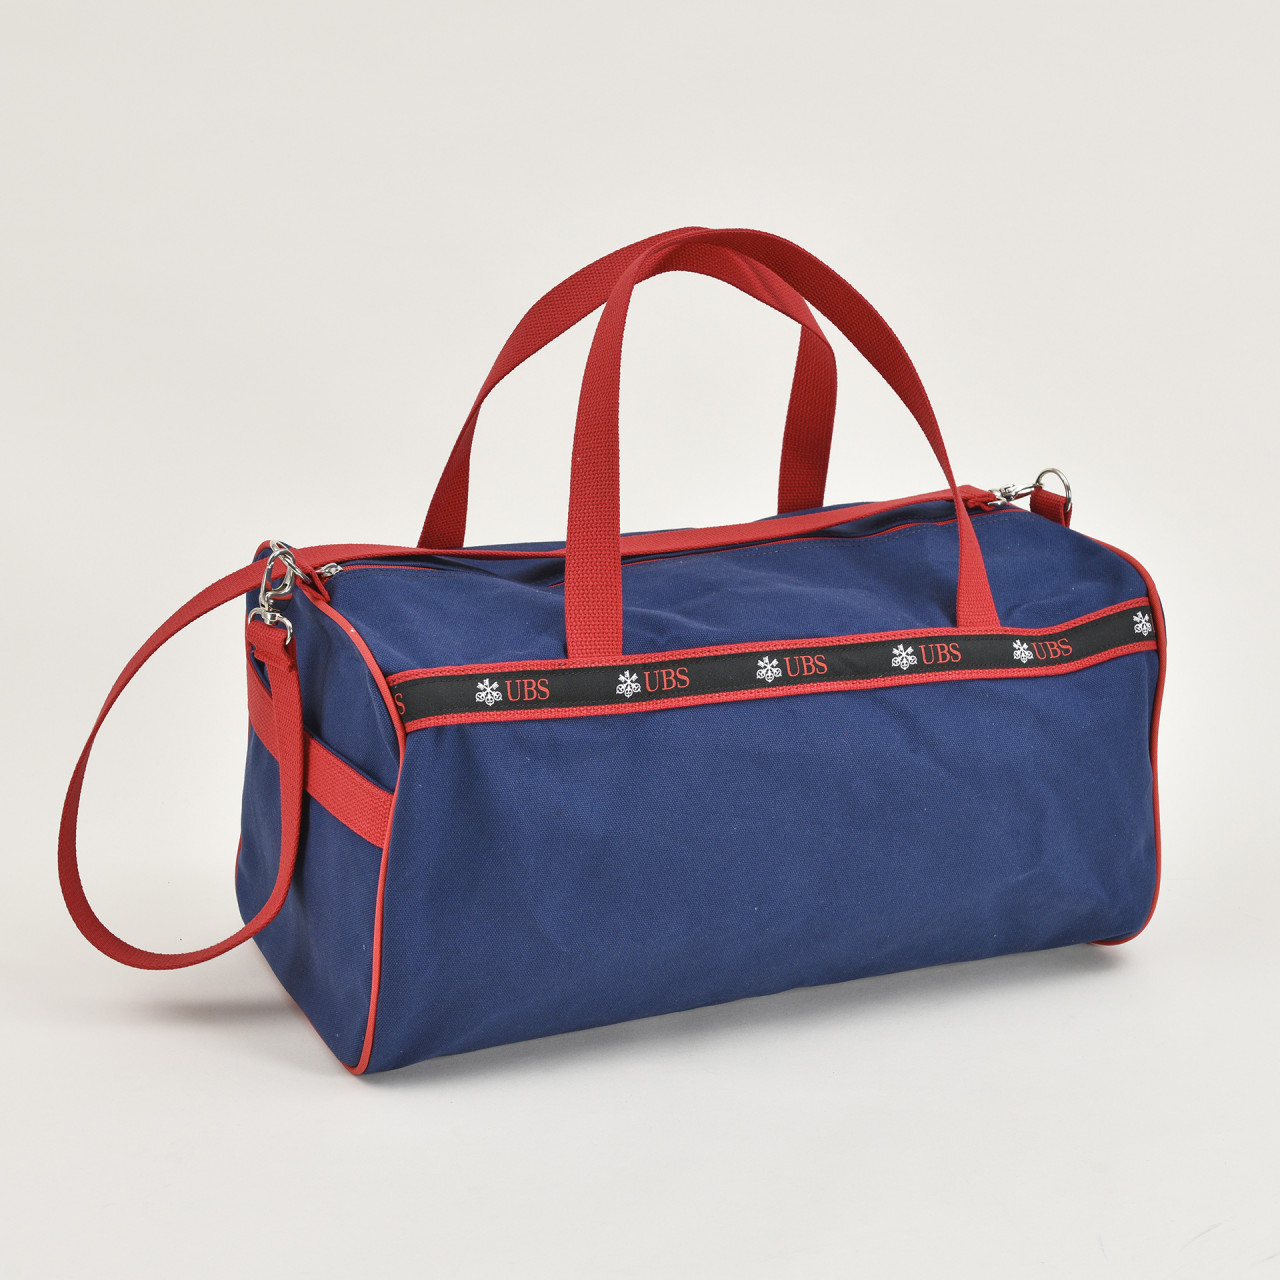 Square End Duffel | Satchels NY Bags | Products | A leading supplier of ...